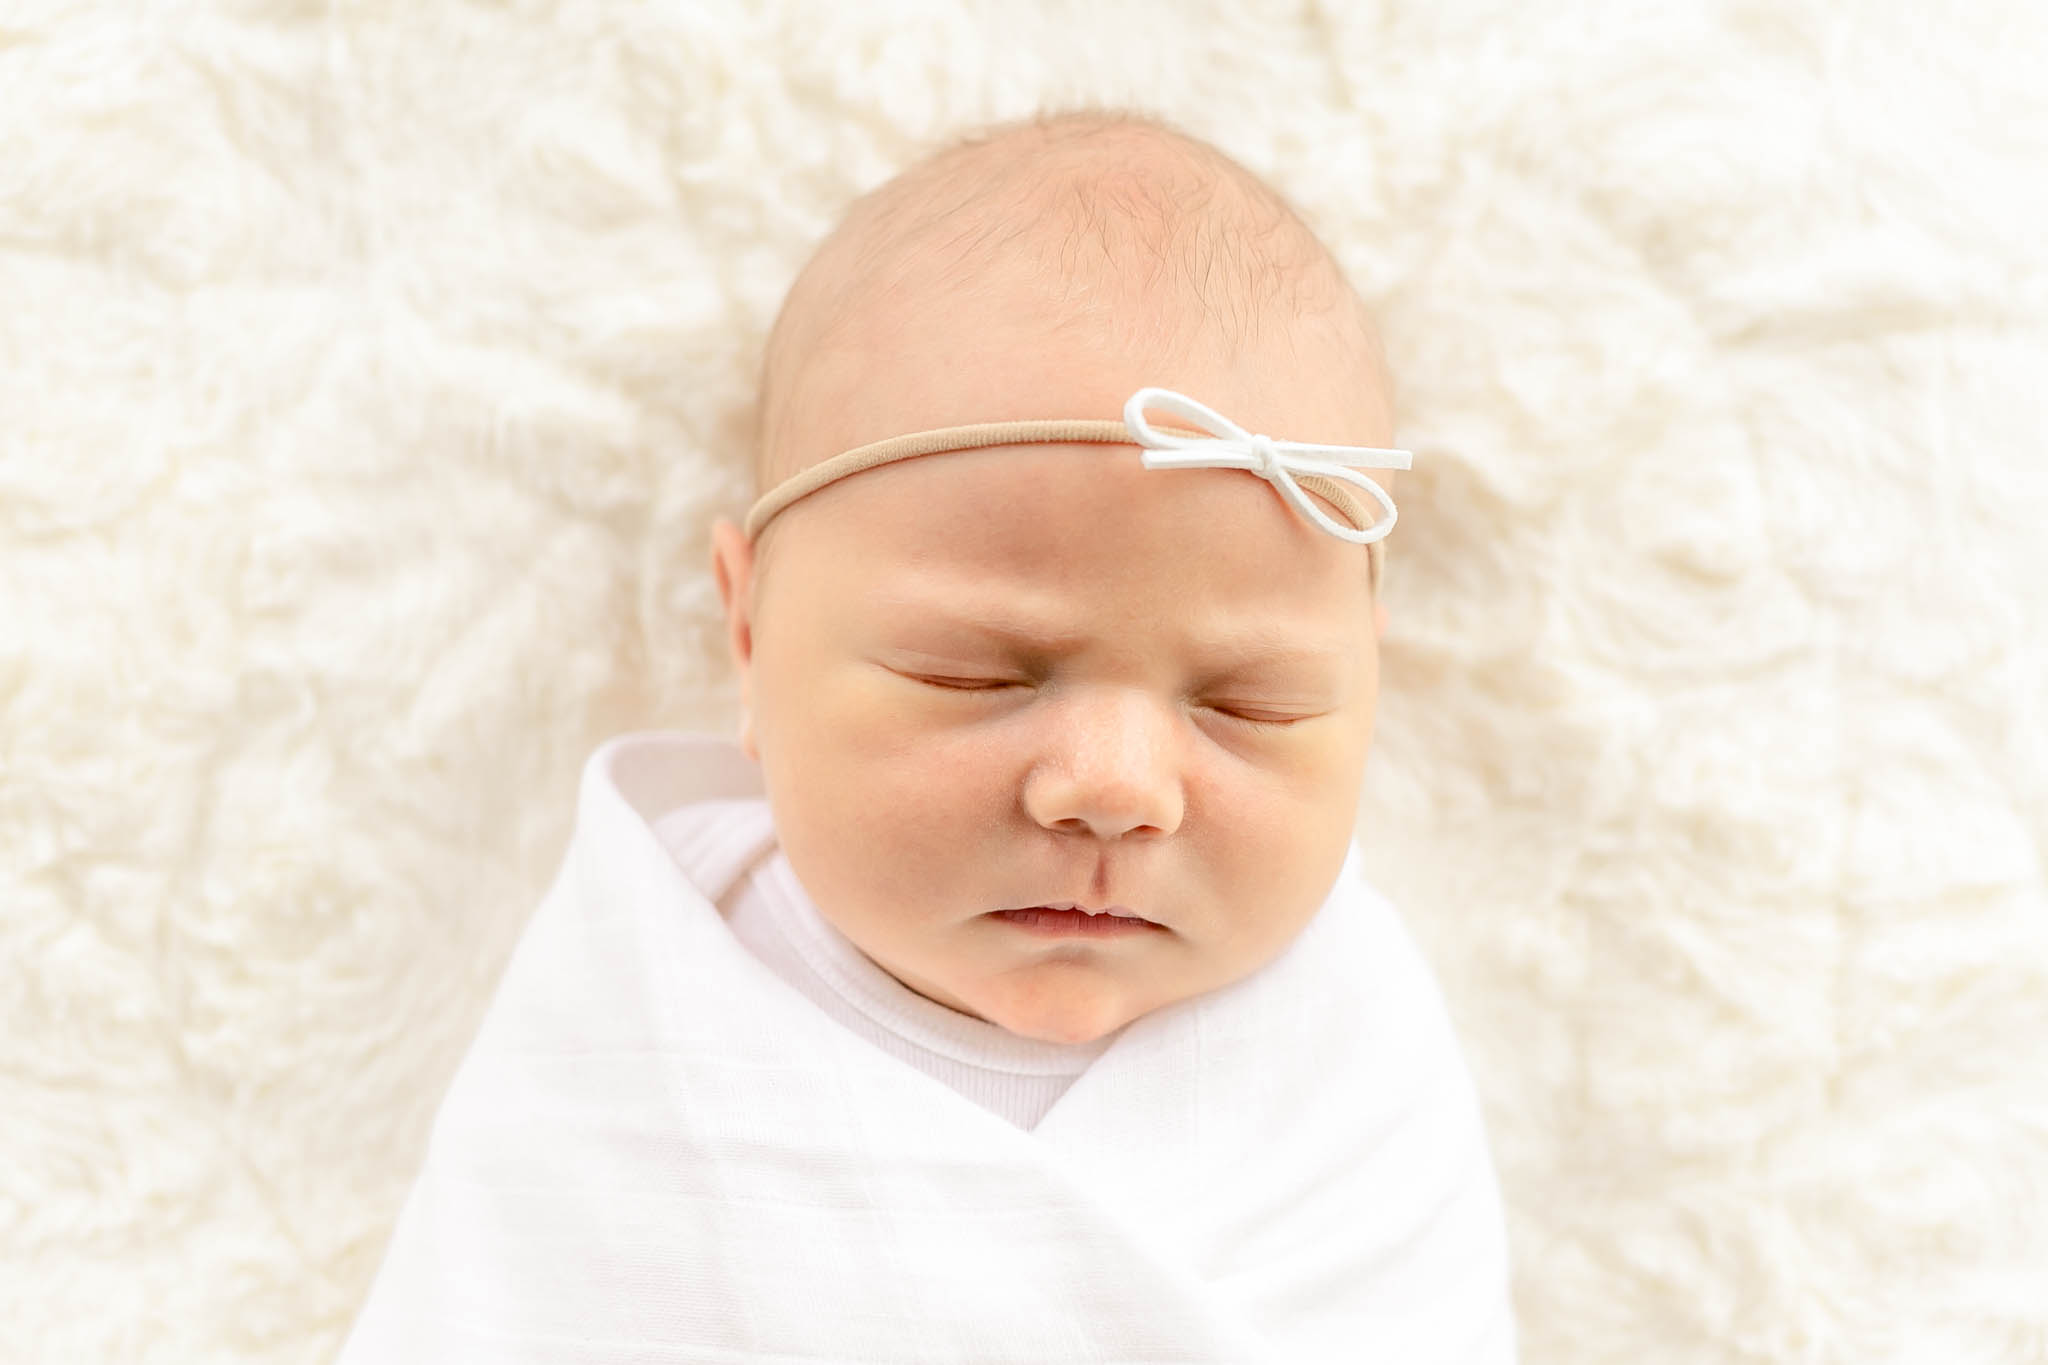 Newborn Baby wrapped in white swaddle Portland newborn photography